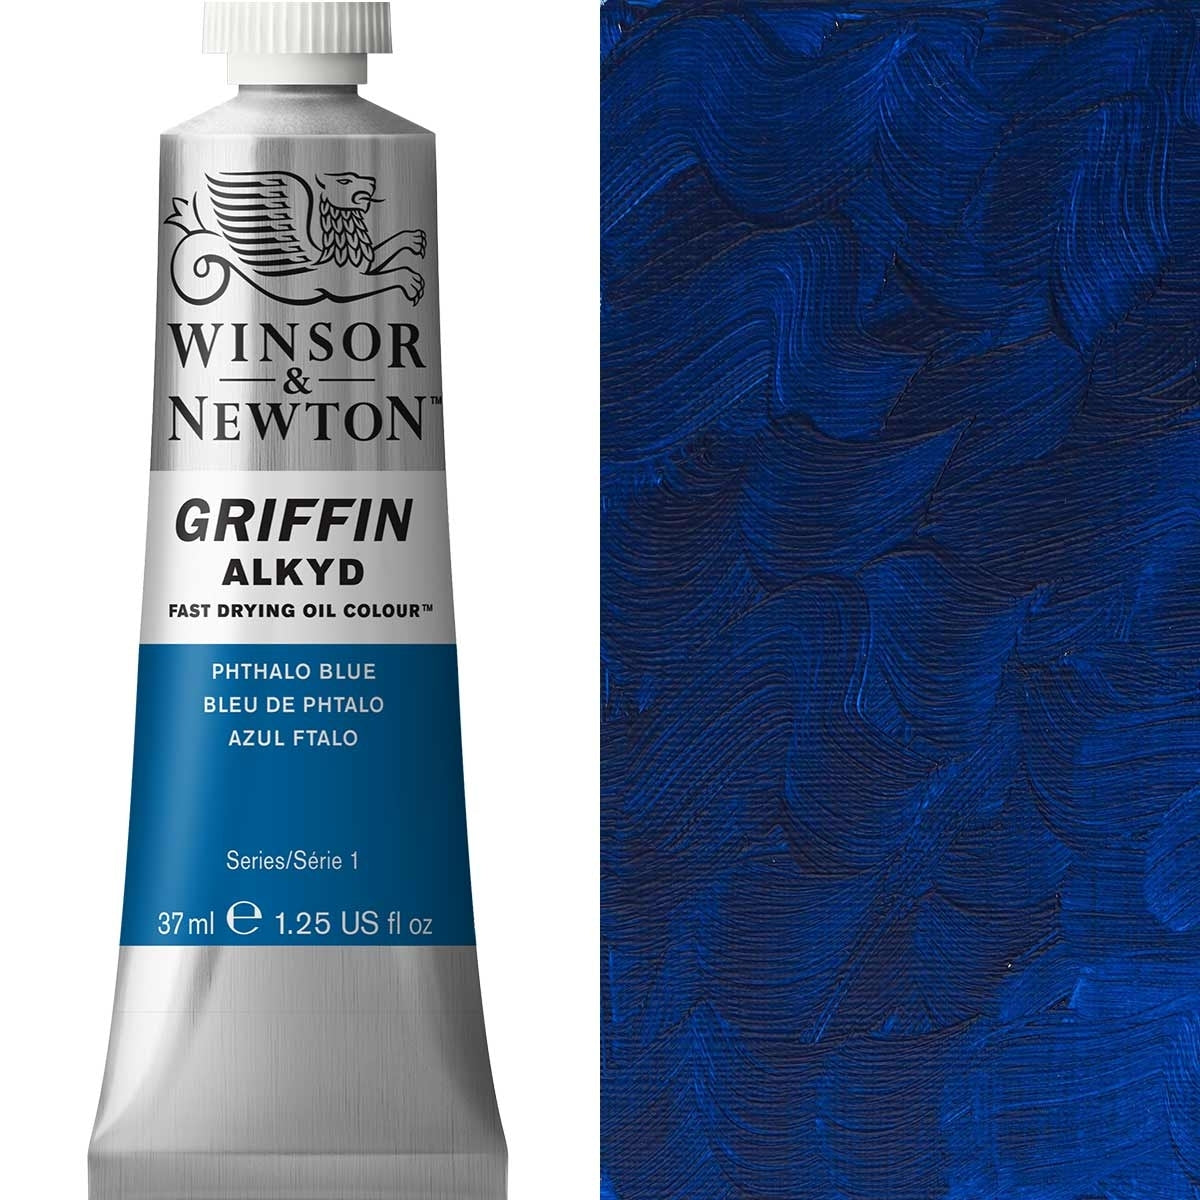 Winsor and Newton - Griffin ALKYD Oil Colour - 37ml - Phthalo Blue